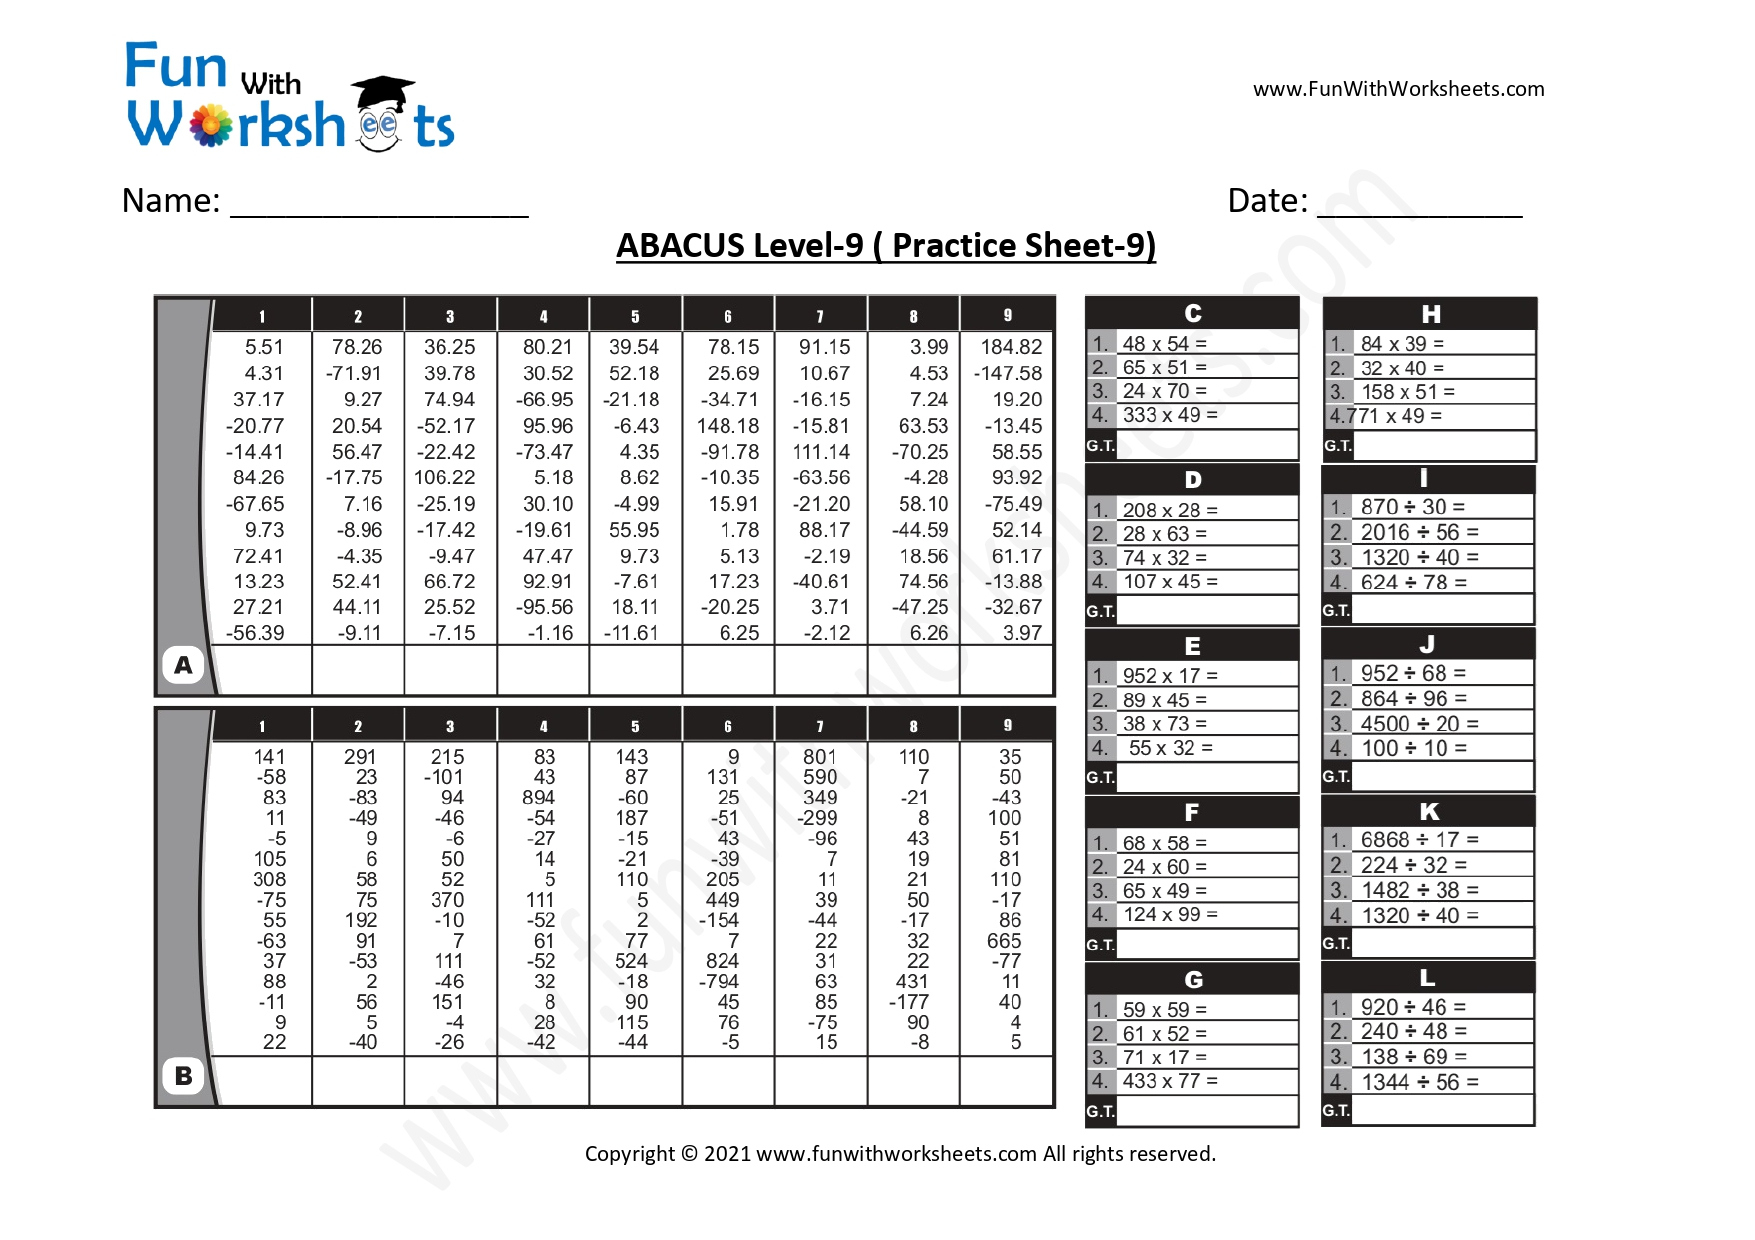 Free Printable Worksheets -Abacus Archives - Fun With Worksheets in Free Printable Abacus Worksheets